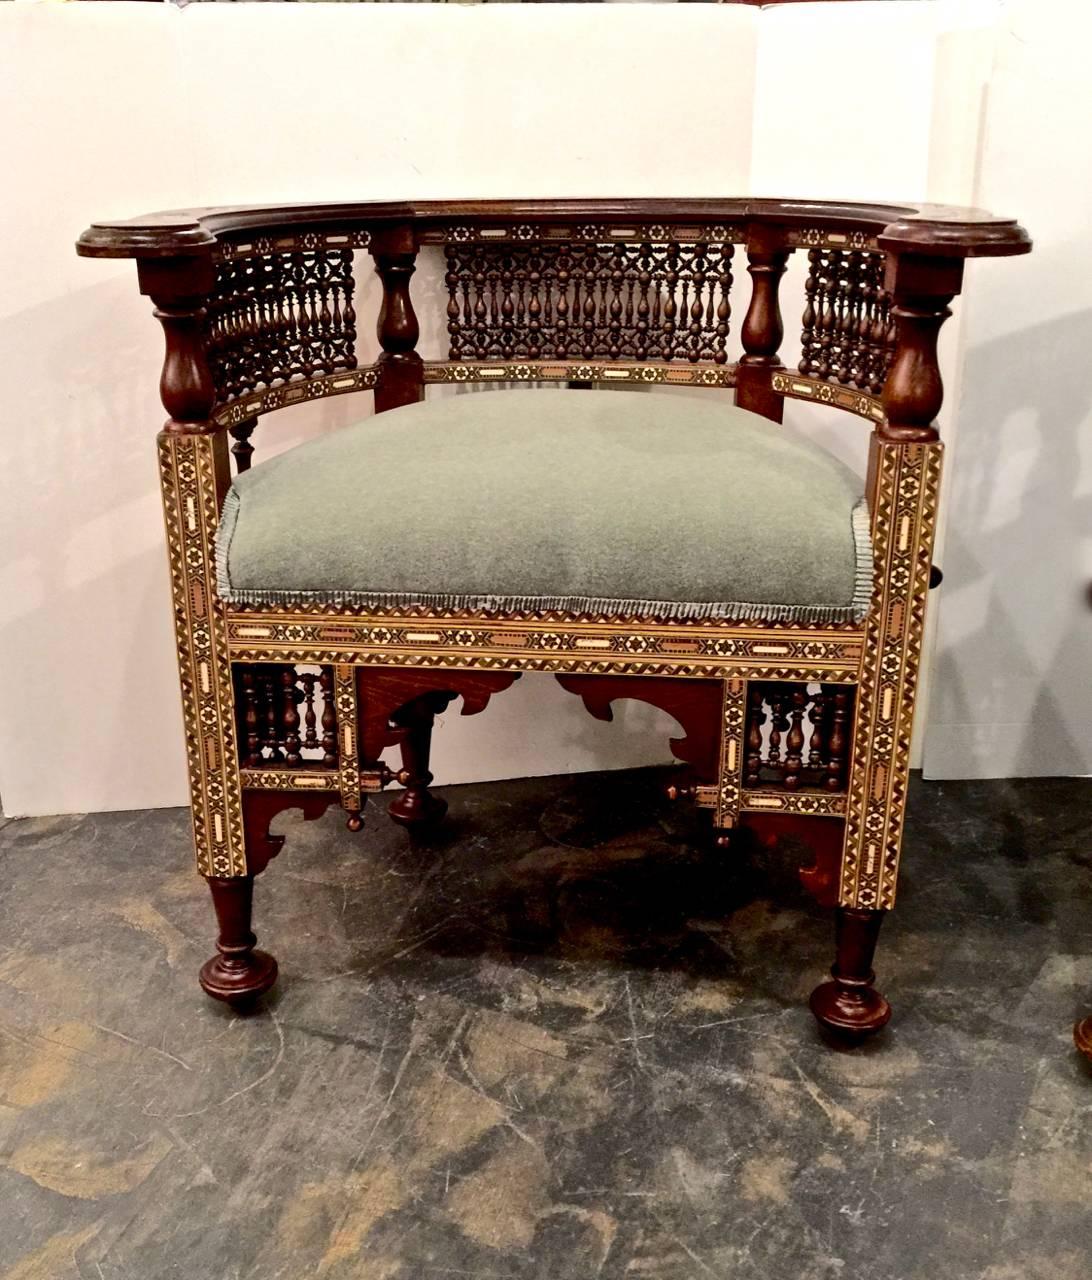 This is an unusual pair of stunning antique Damascus or Syrian finely inlaid barrel back chairs. The chairs are in remarkably good condition having old very minor restorations; they are newly upholstered in a fine minty-sage mohair velvet and